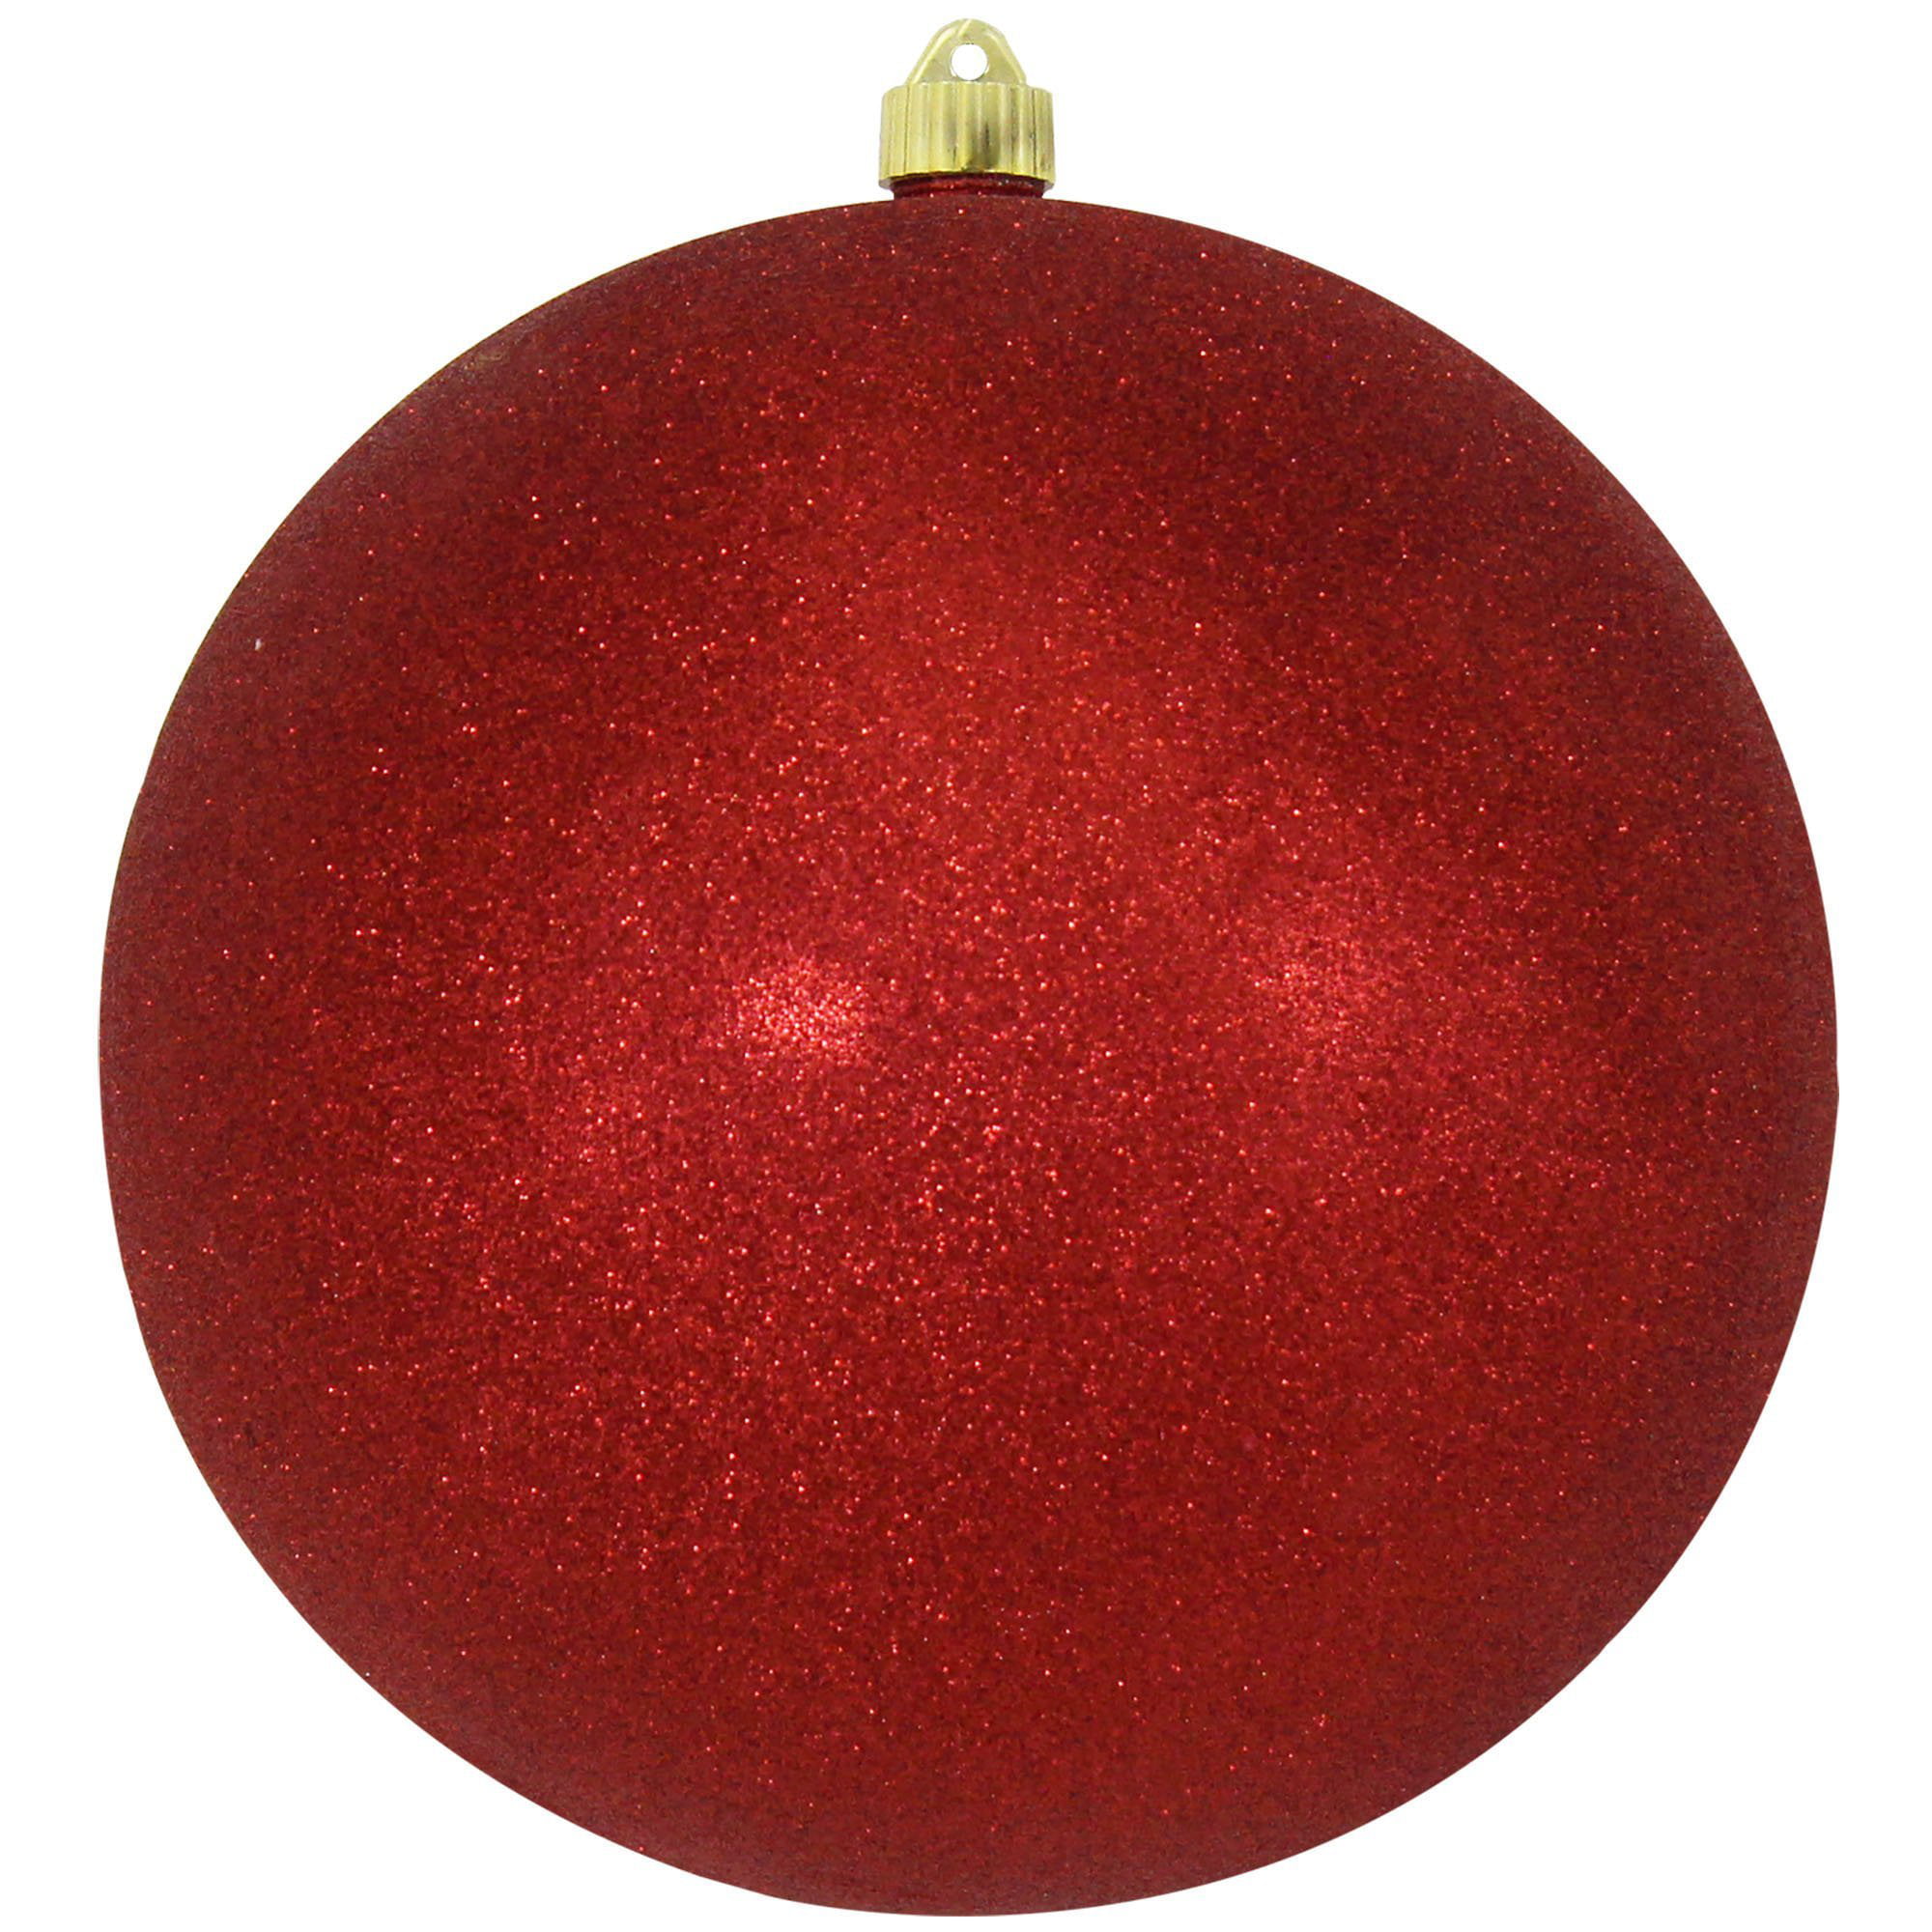 9" Red Finial Christmas Ornament with Red Glitter 